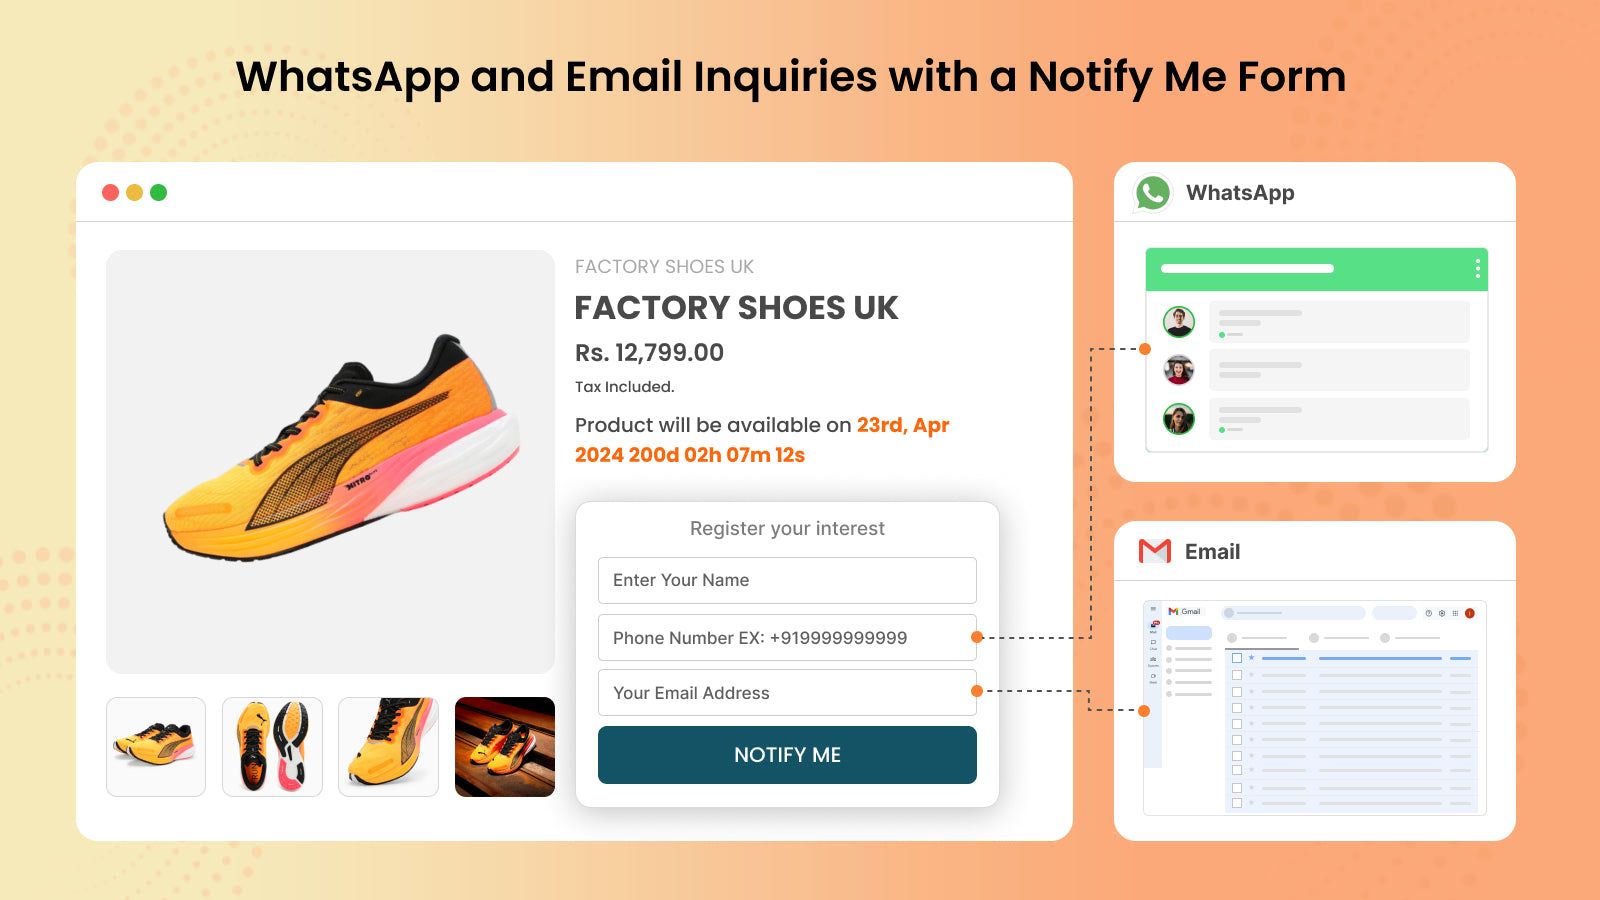 WhatsApp and Email Inquiries with a Notify Me Form